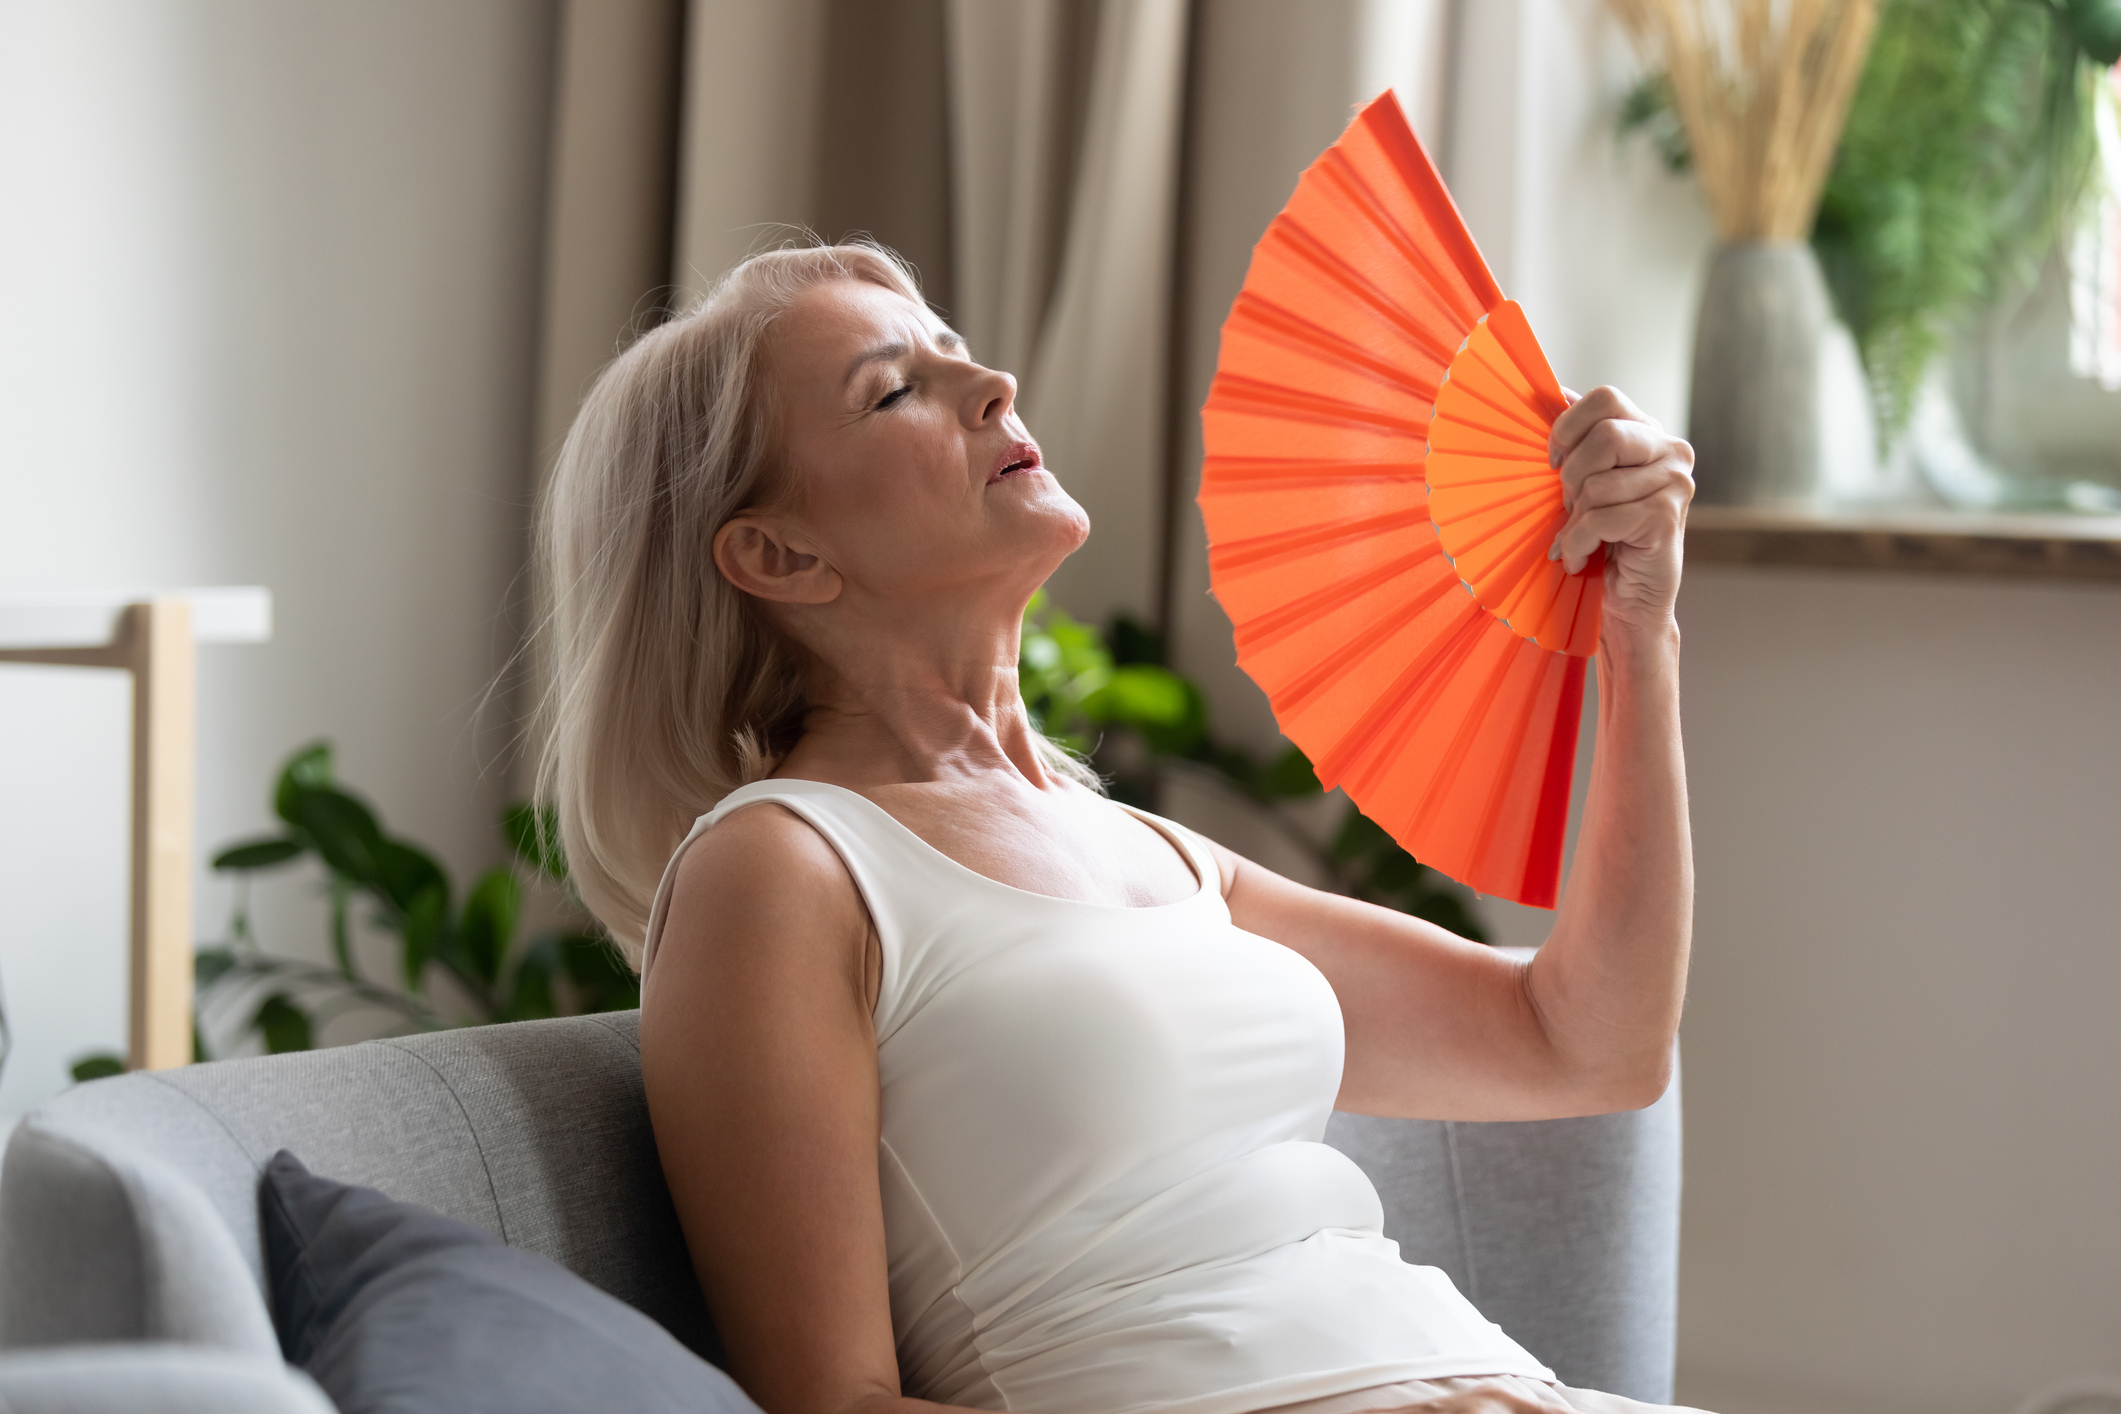 woman in white tank top fanning herself with orange handheld fan looks tired and hot in her home